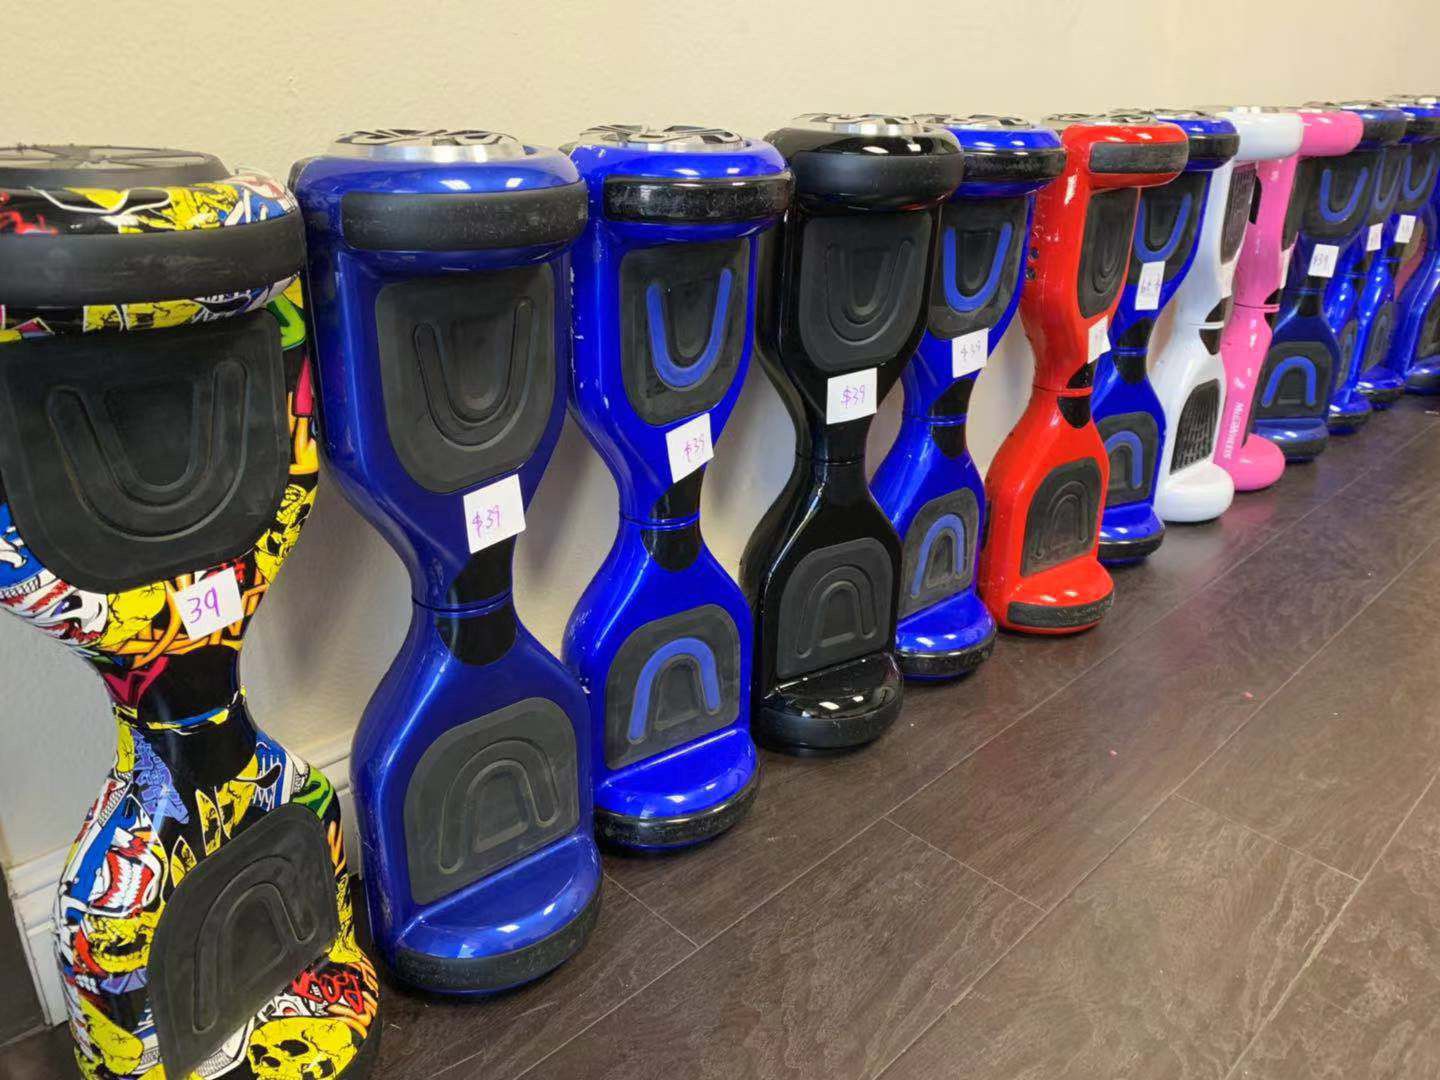 Cheap hoverboards with led lights perfect working condition factory clearance price sale